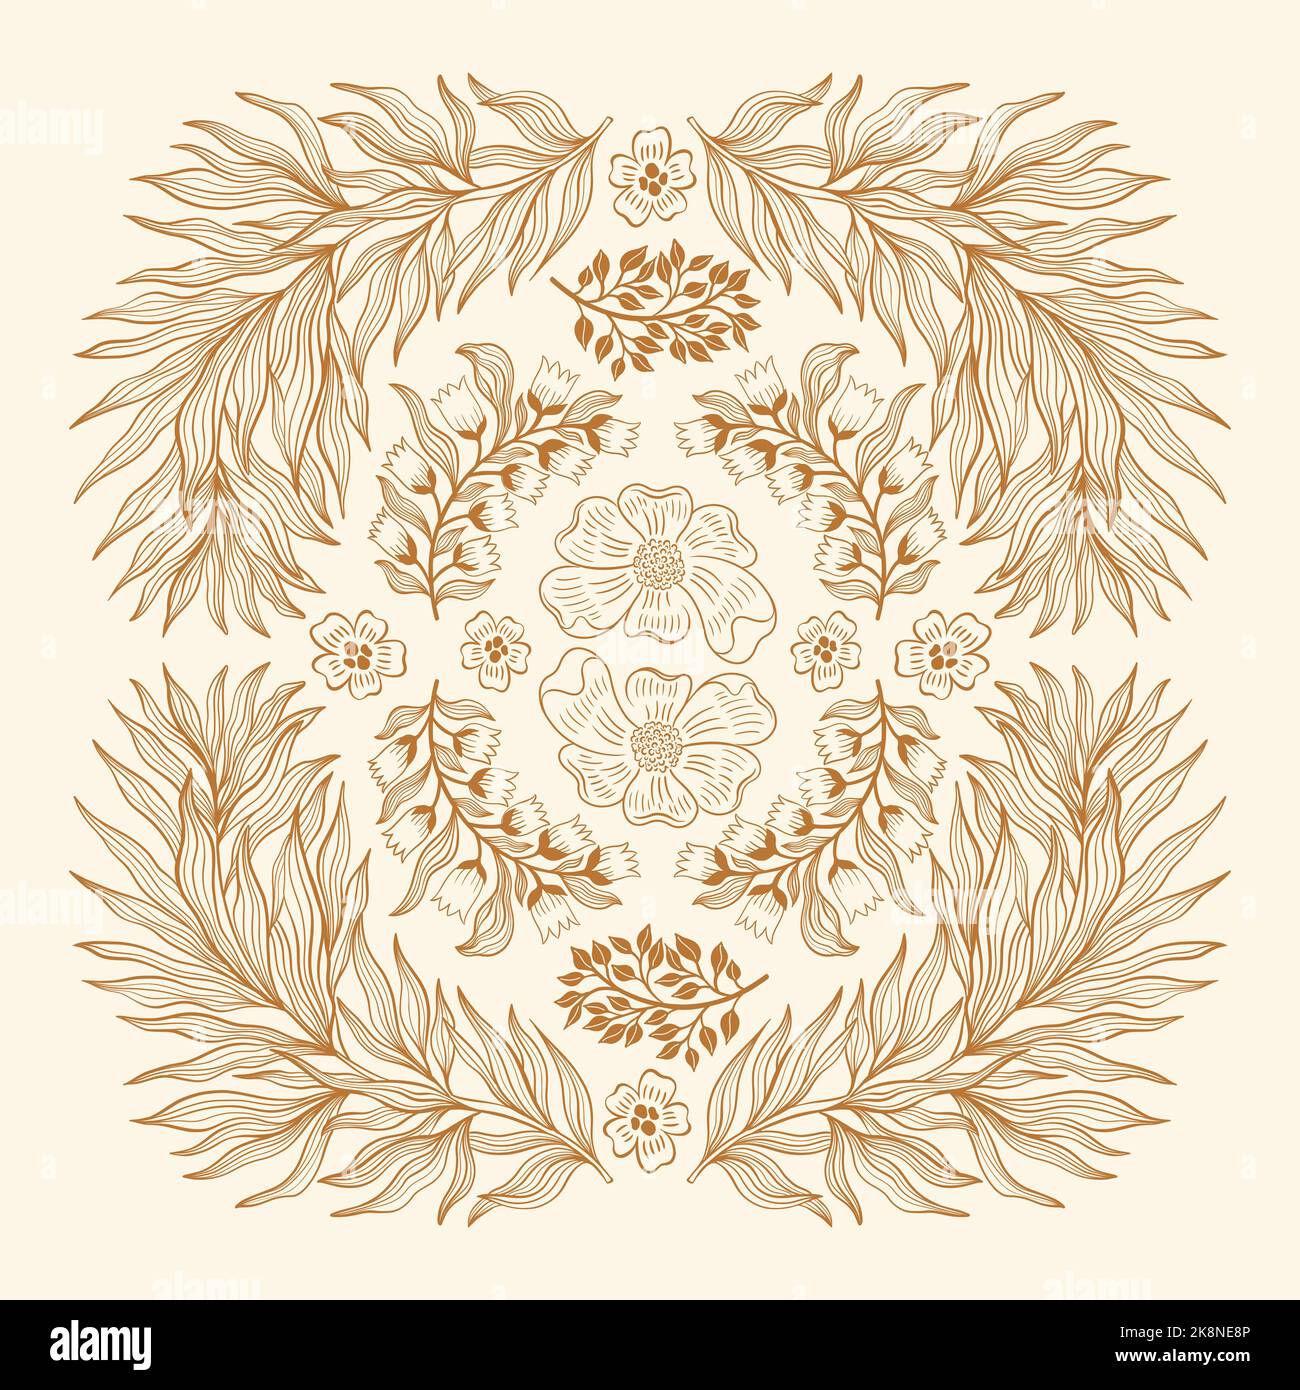 Collection vintage floral motif. William Moriss style art and craft movement. Design outline flower symbol. Vector illustration. Stock Vector